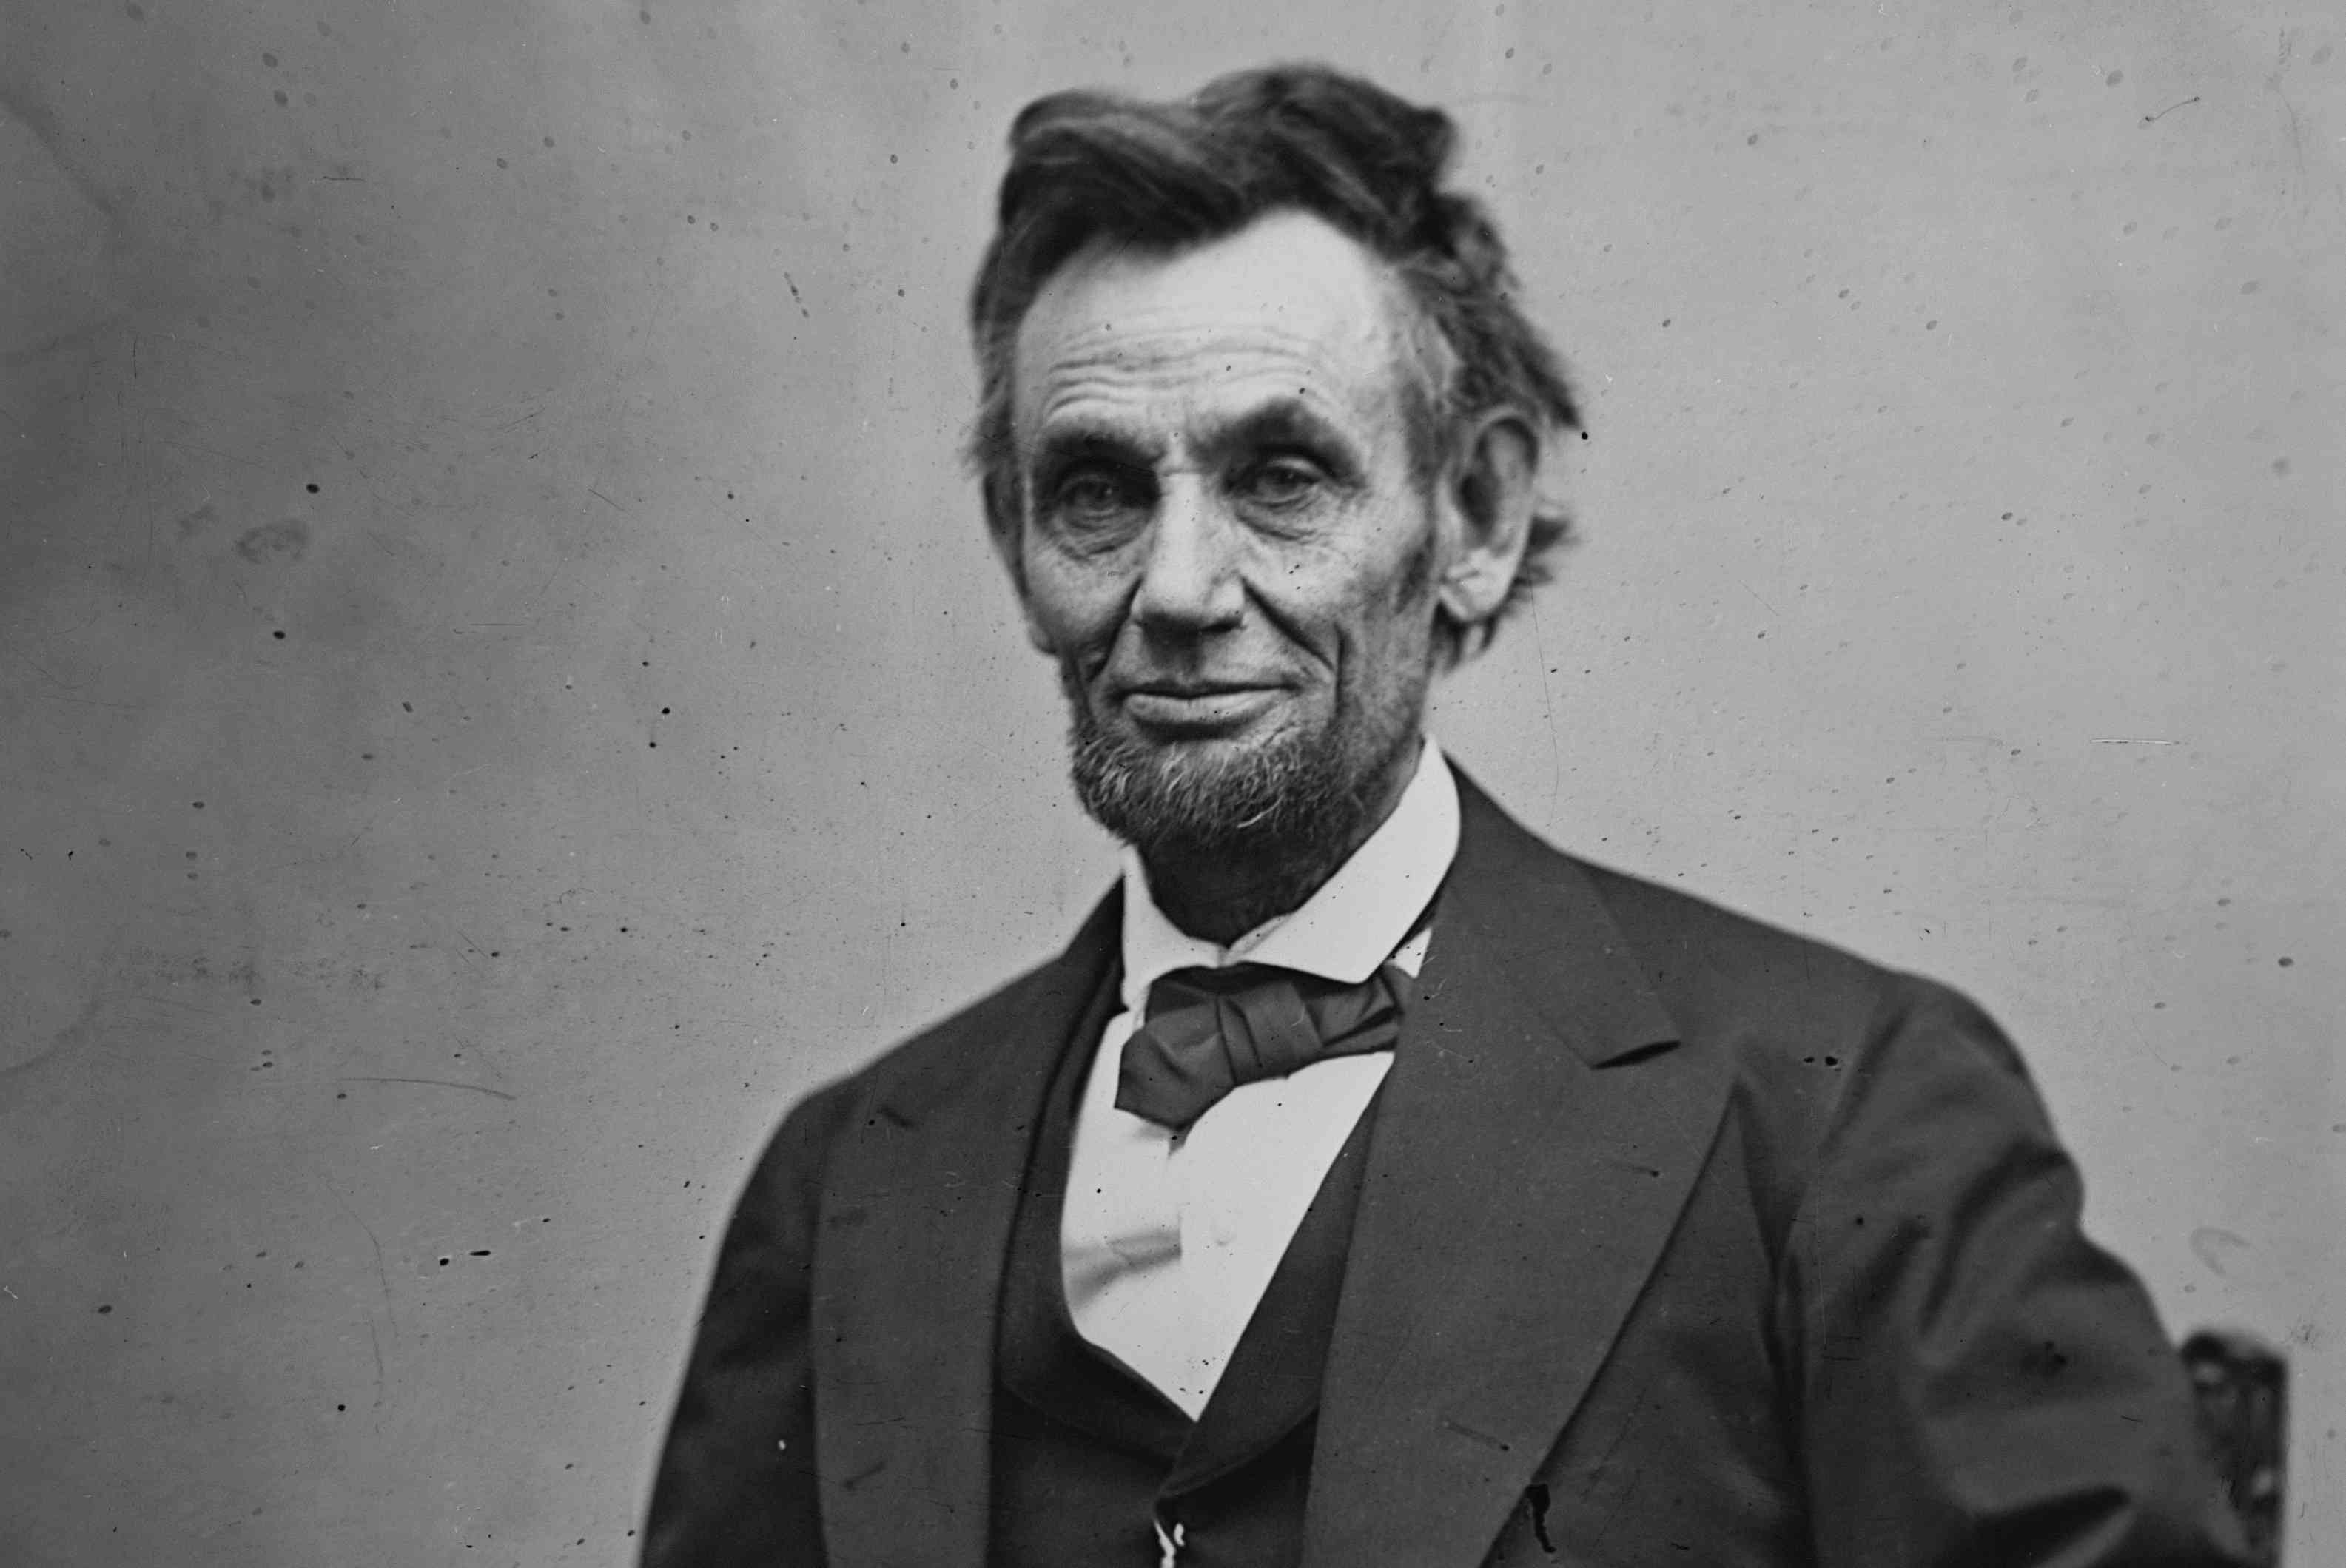 Can You Pass This Basic Middle School History Test? Abraham Lincoln